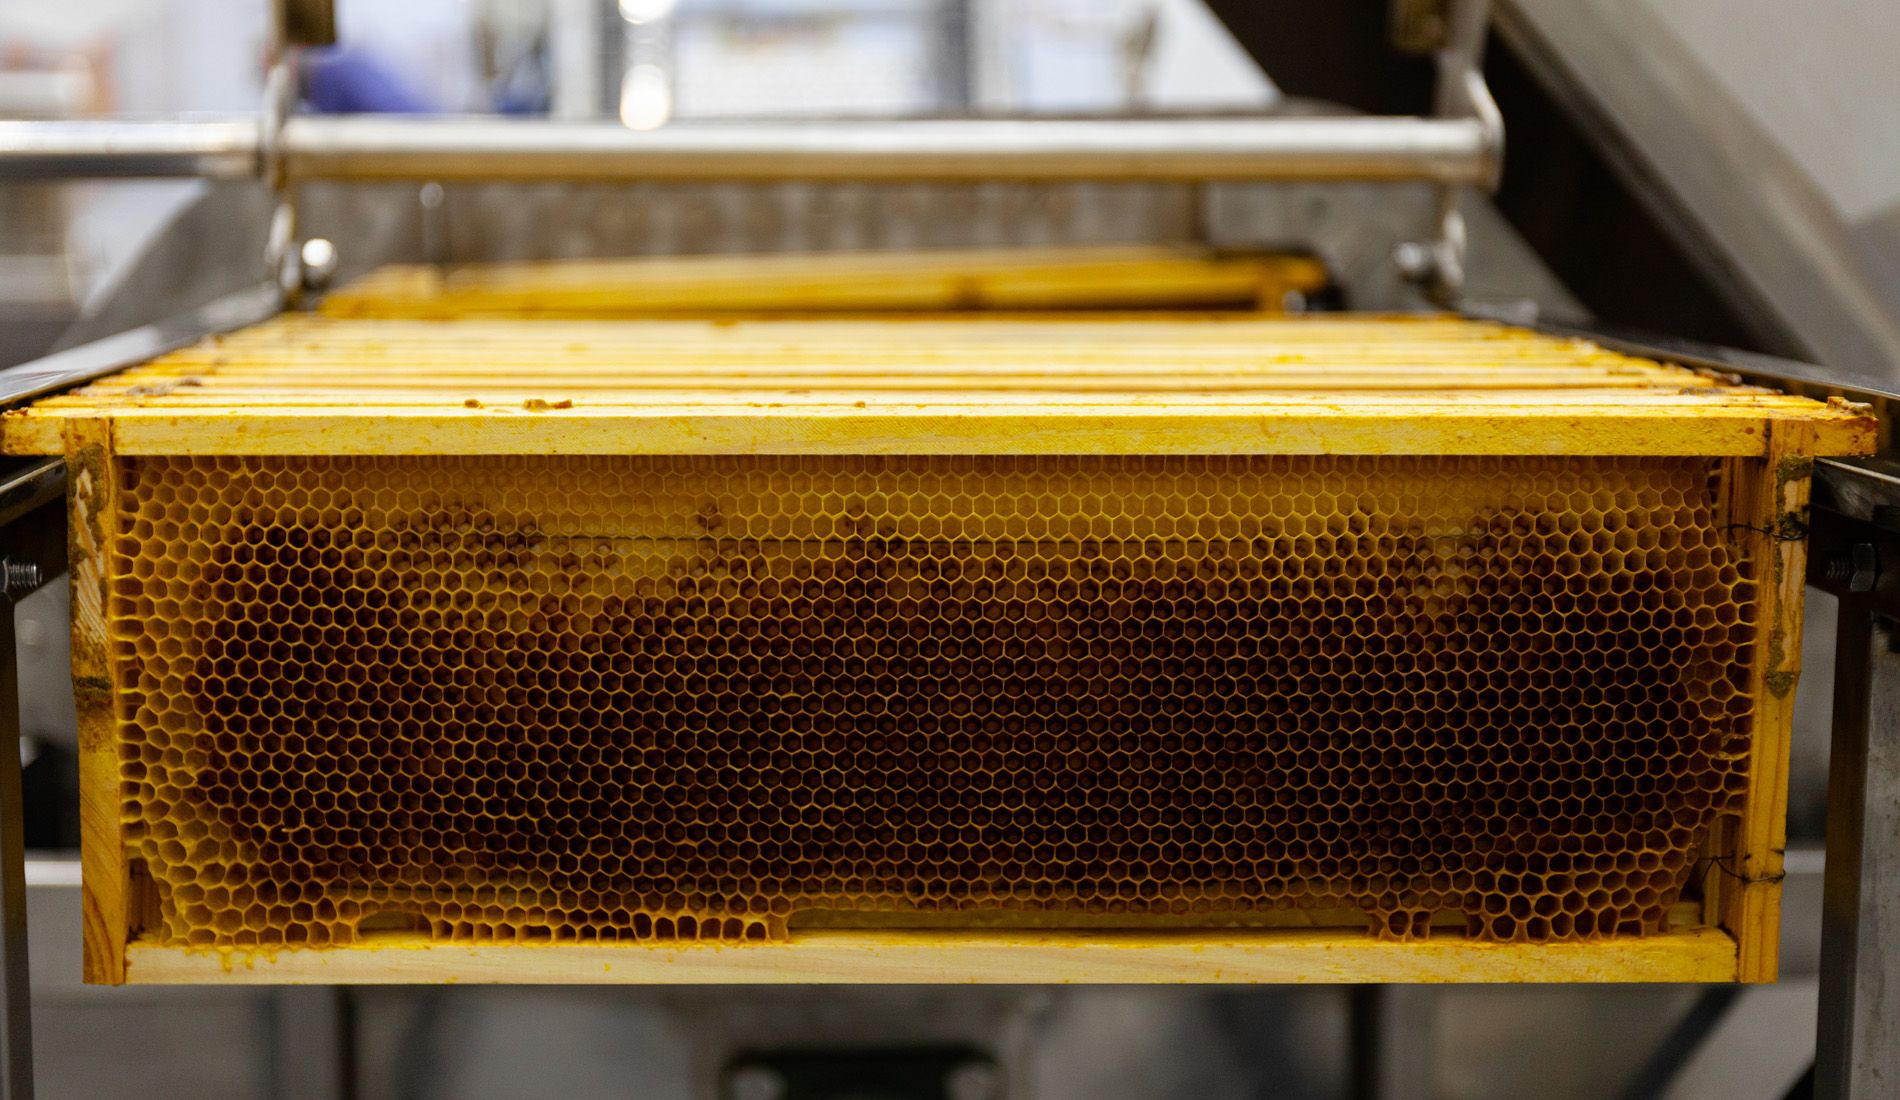 Experiences with beekeeping 